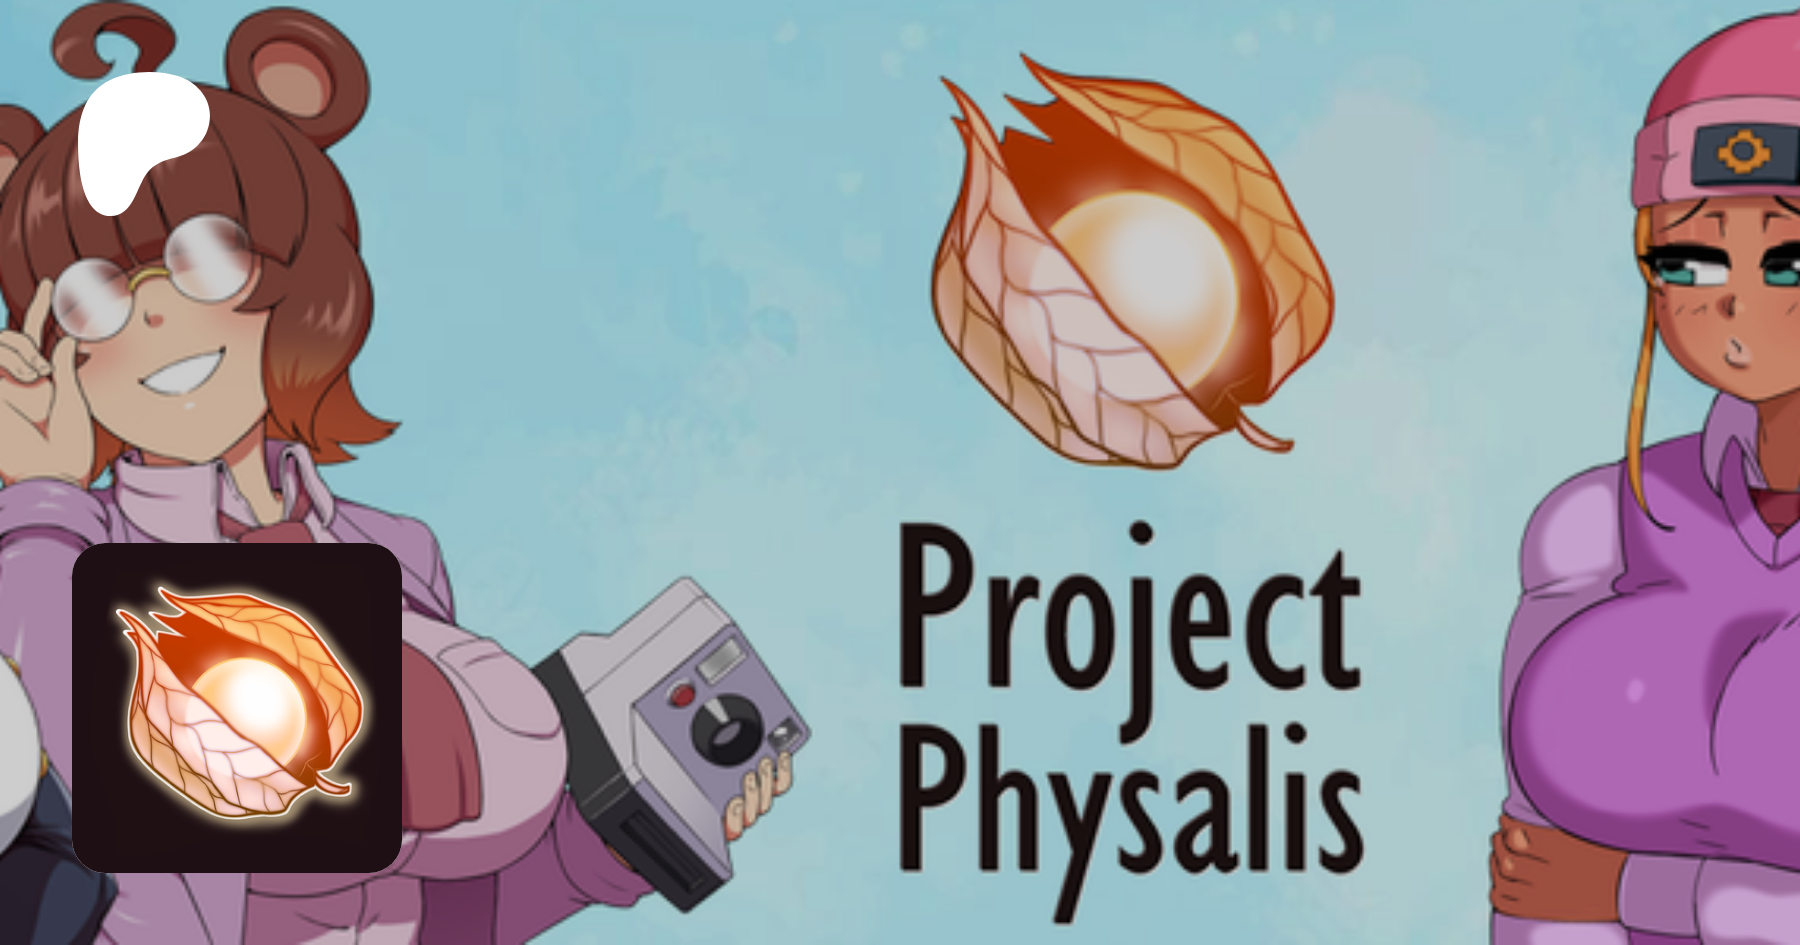 Project physalis game